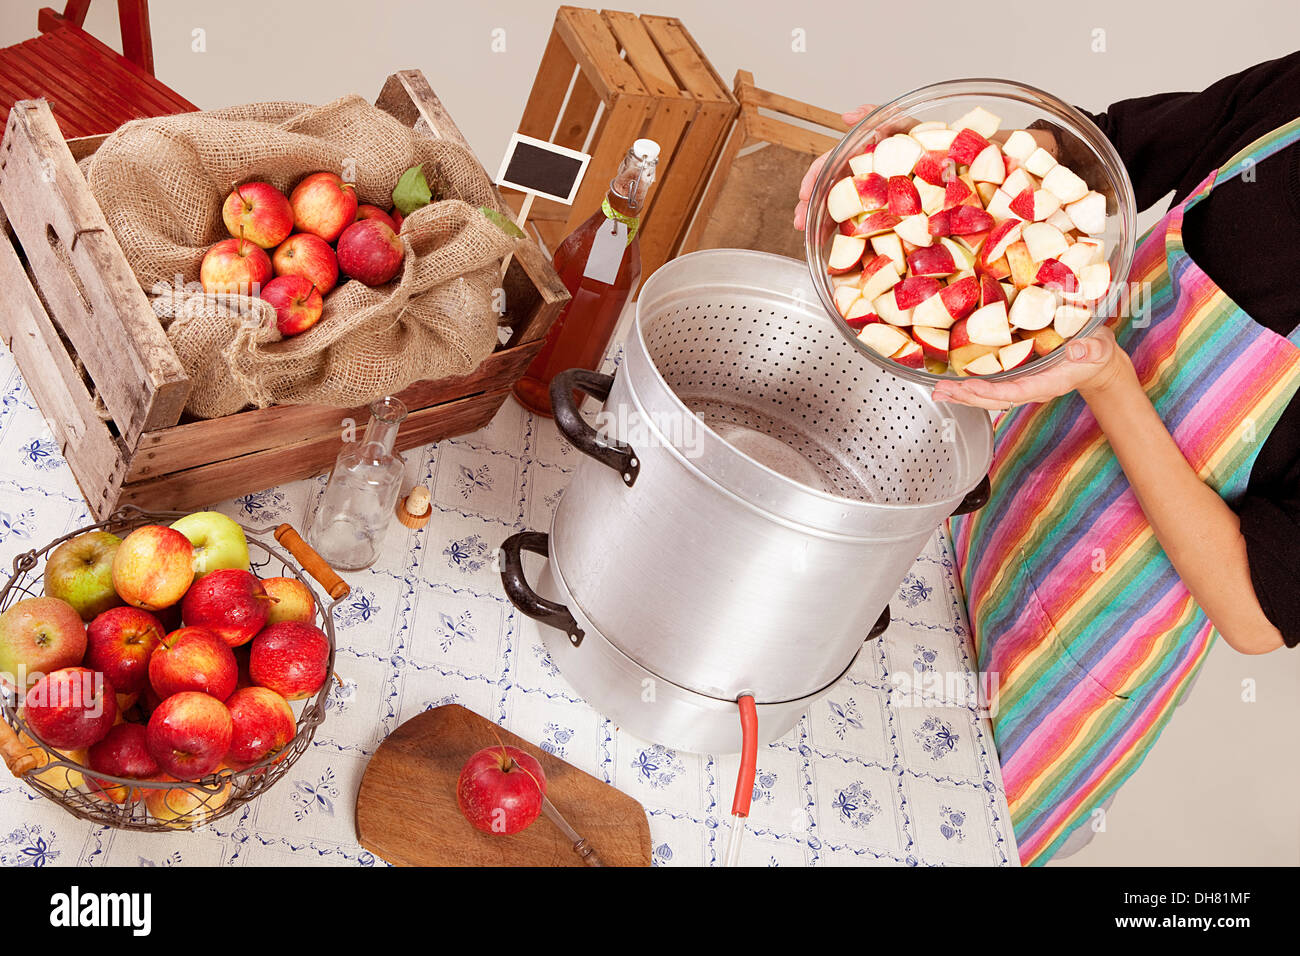 boil apples, make apple juice itself, on a table, many different apple varieties Stock Photo